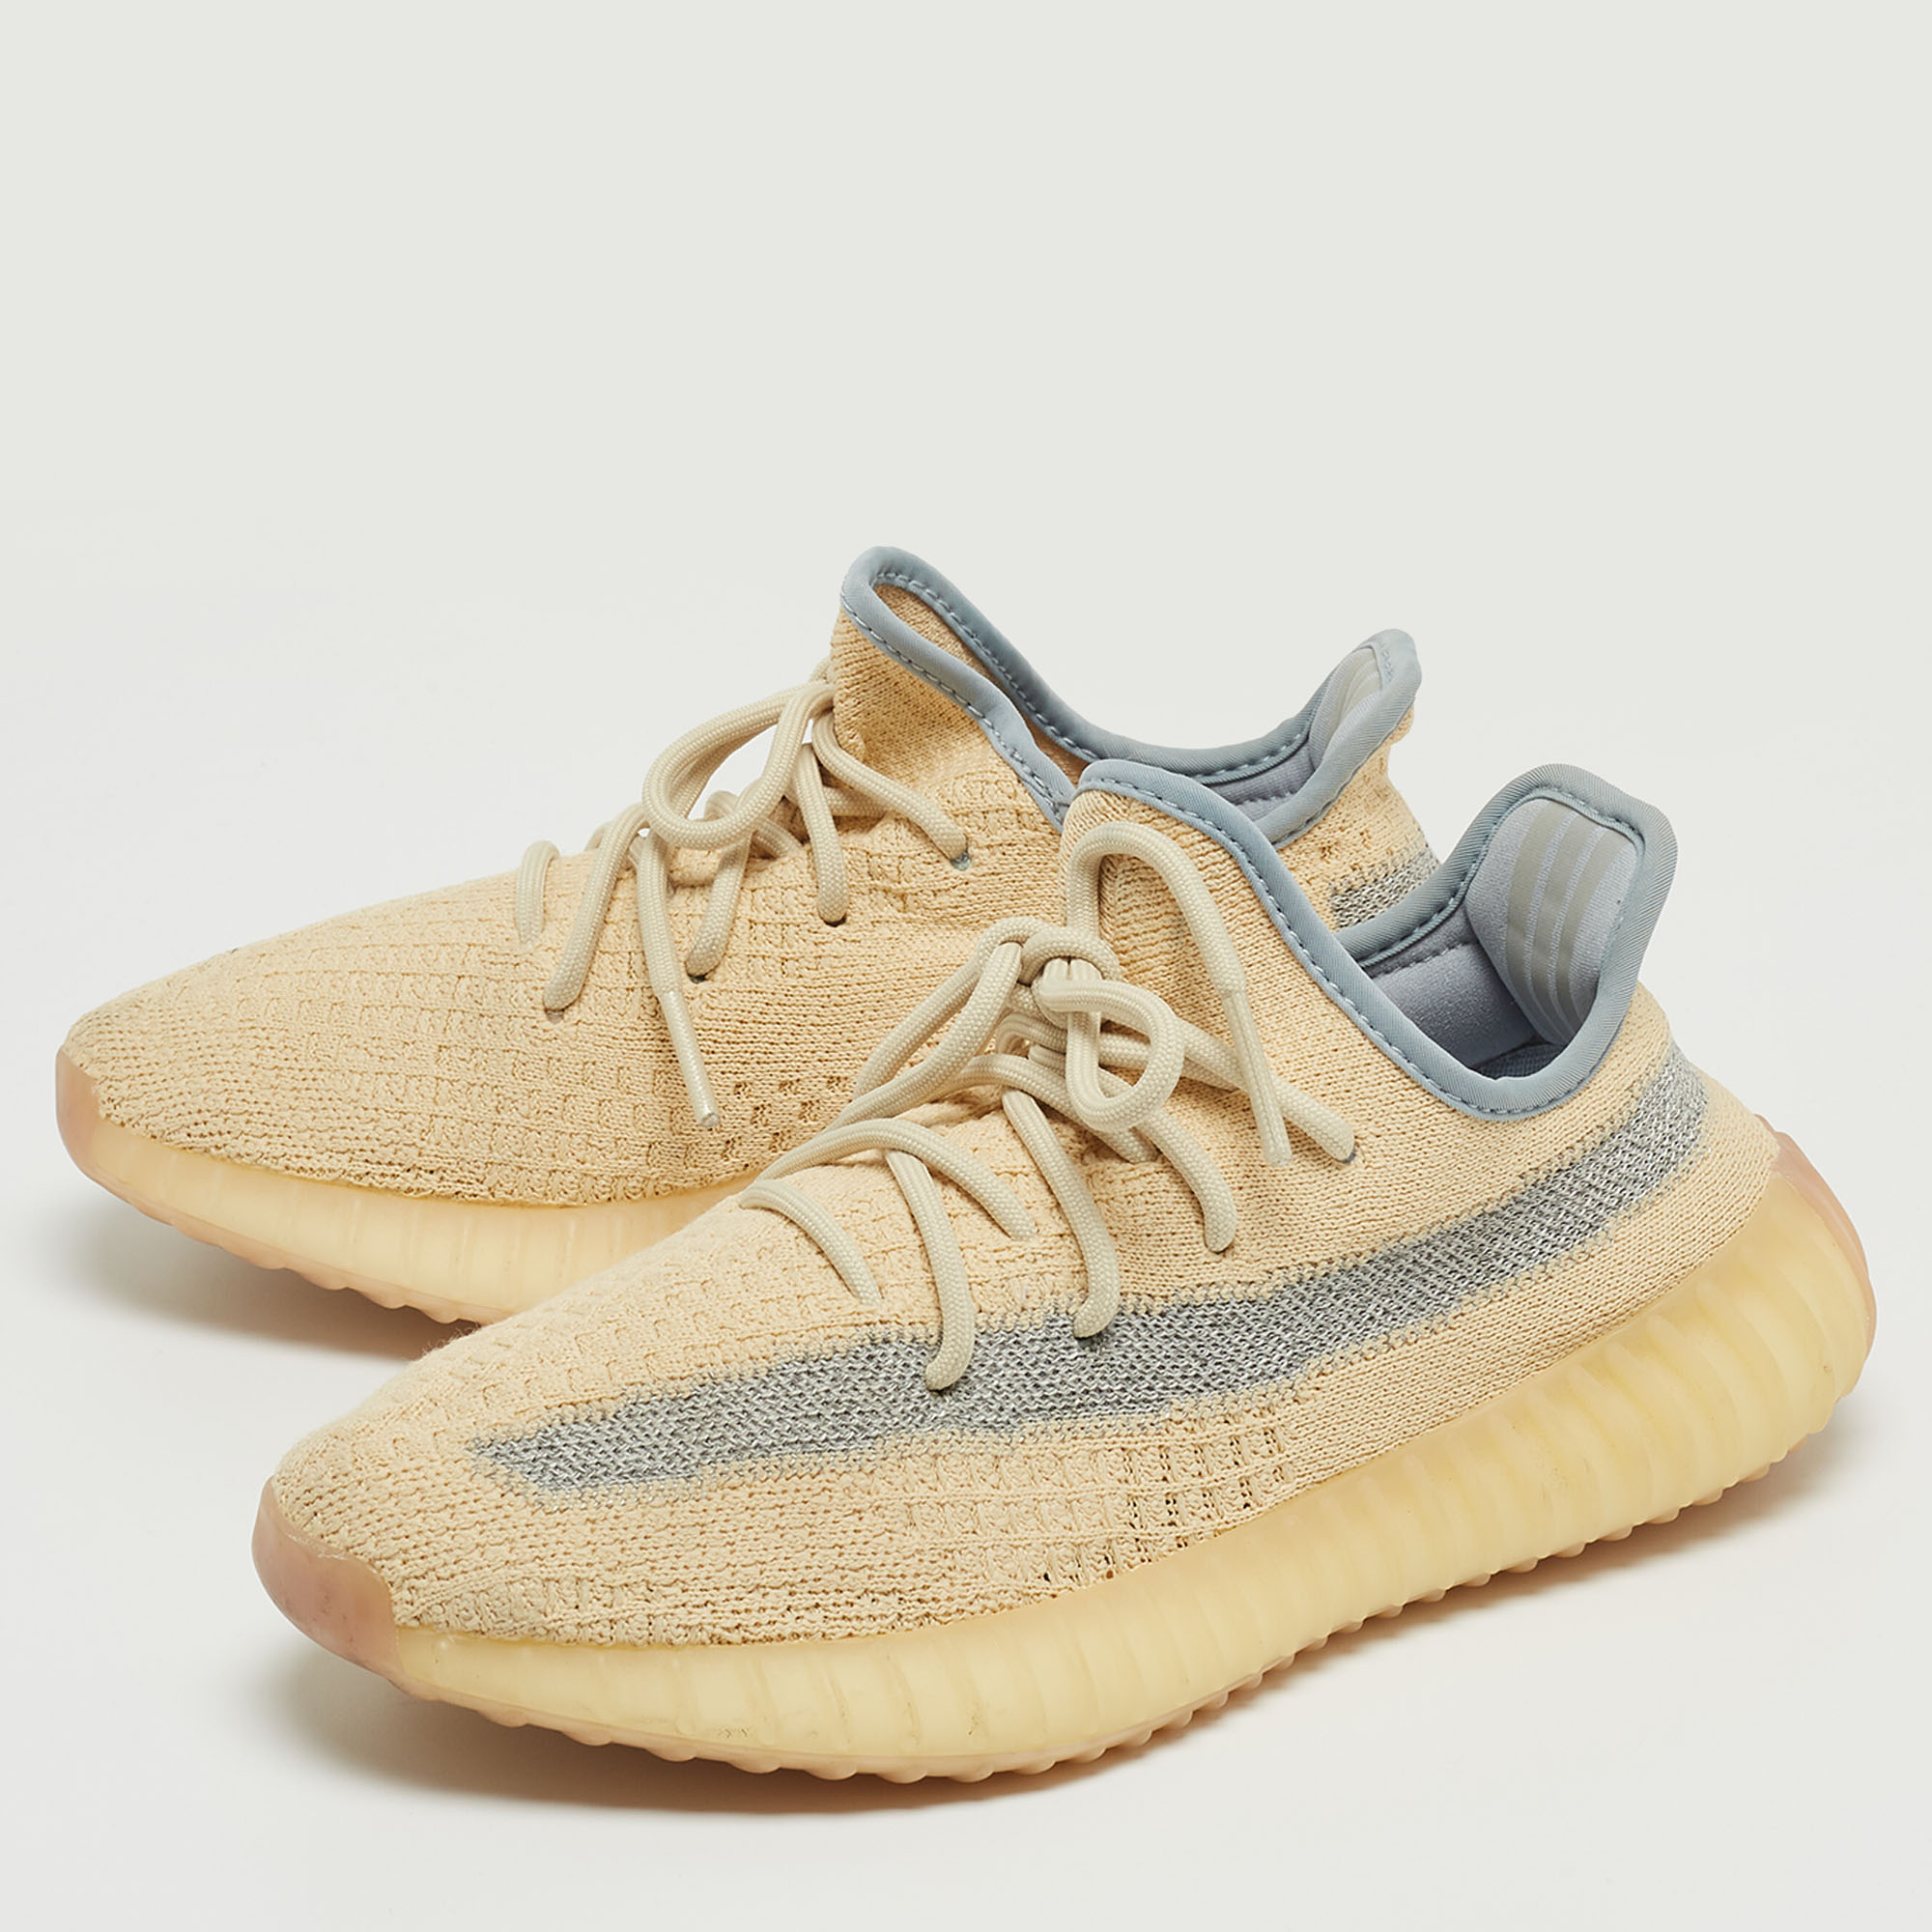 

Yeezy x Adidas Two Tone Knit Fabric Boost 350 V2 Linen Sneakers Size 38 2/3, Yellow